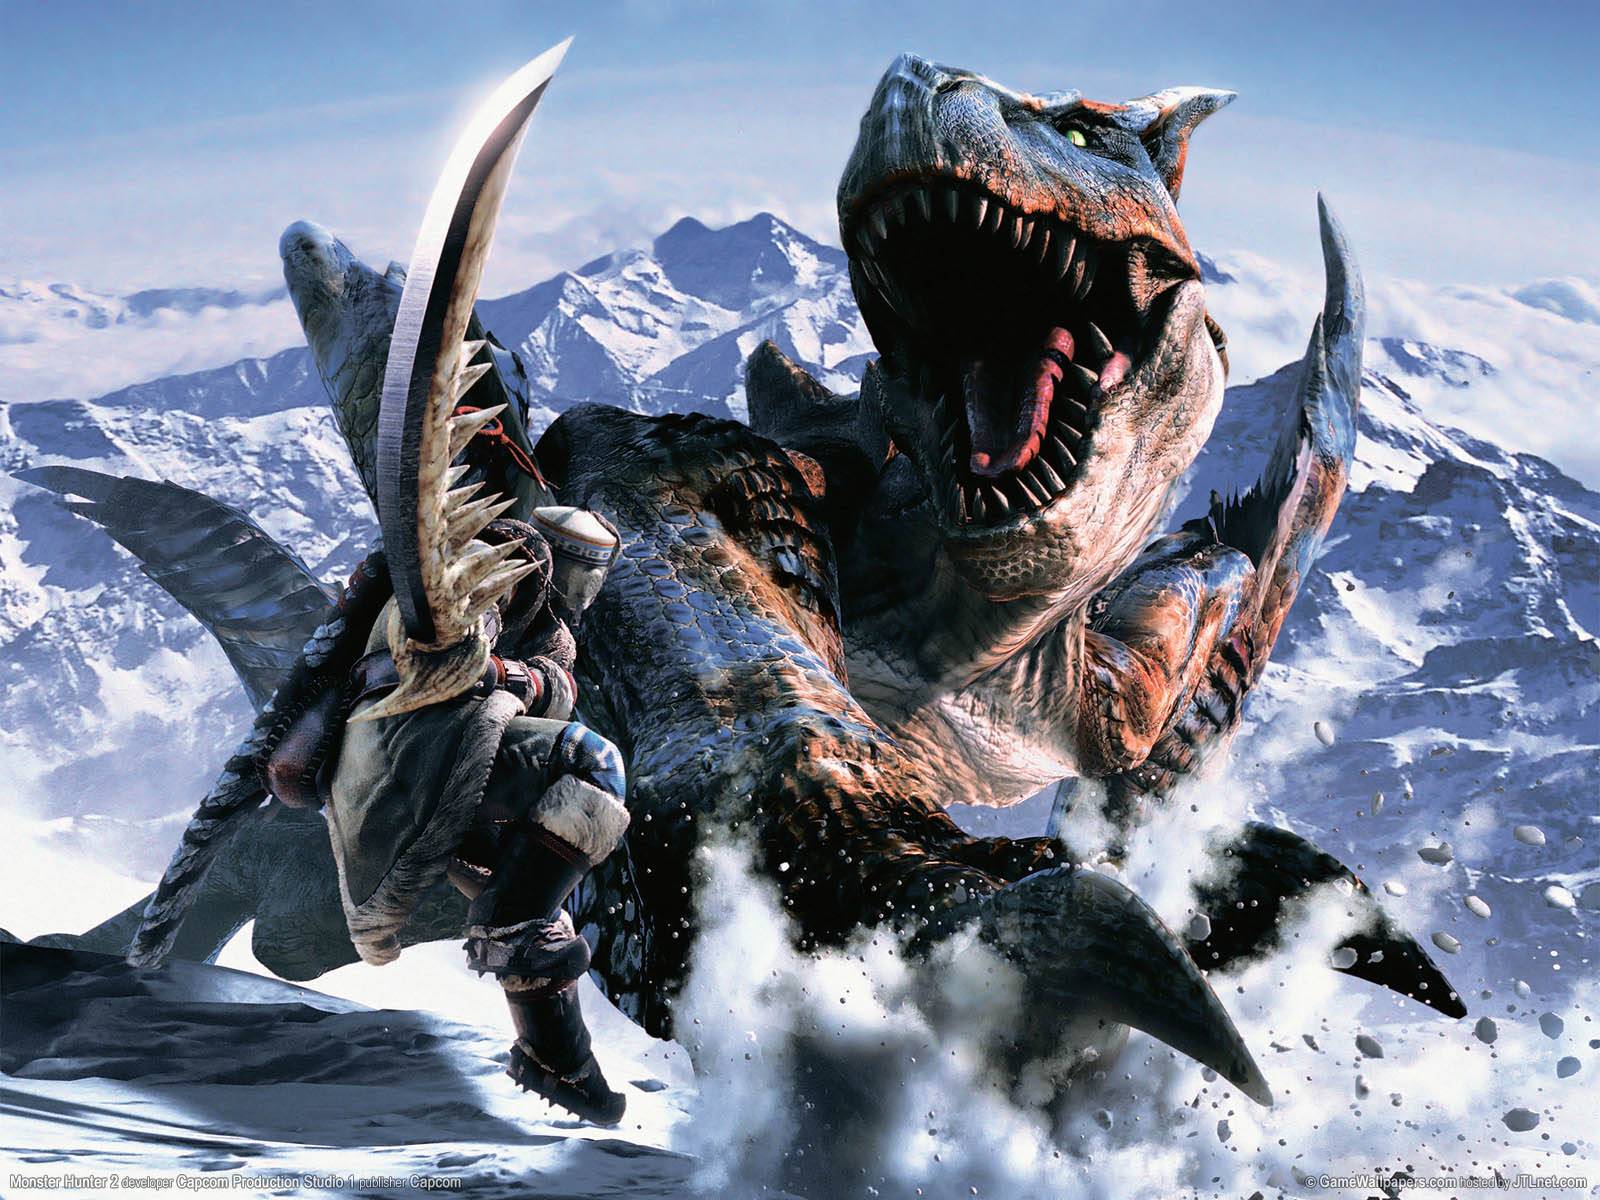 Monster Hunter 4 Wallpapers In HD GamingBoltcom Video Game News